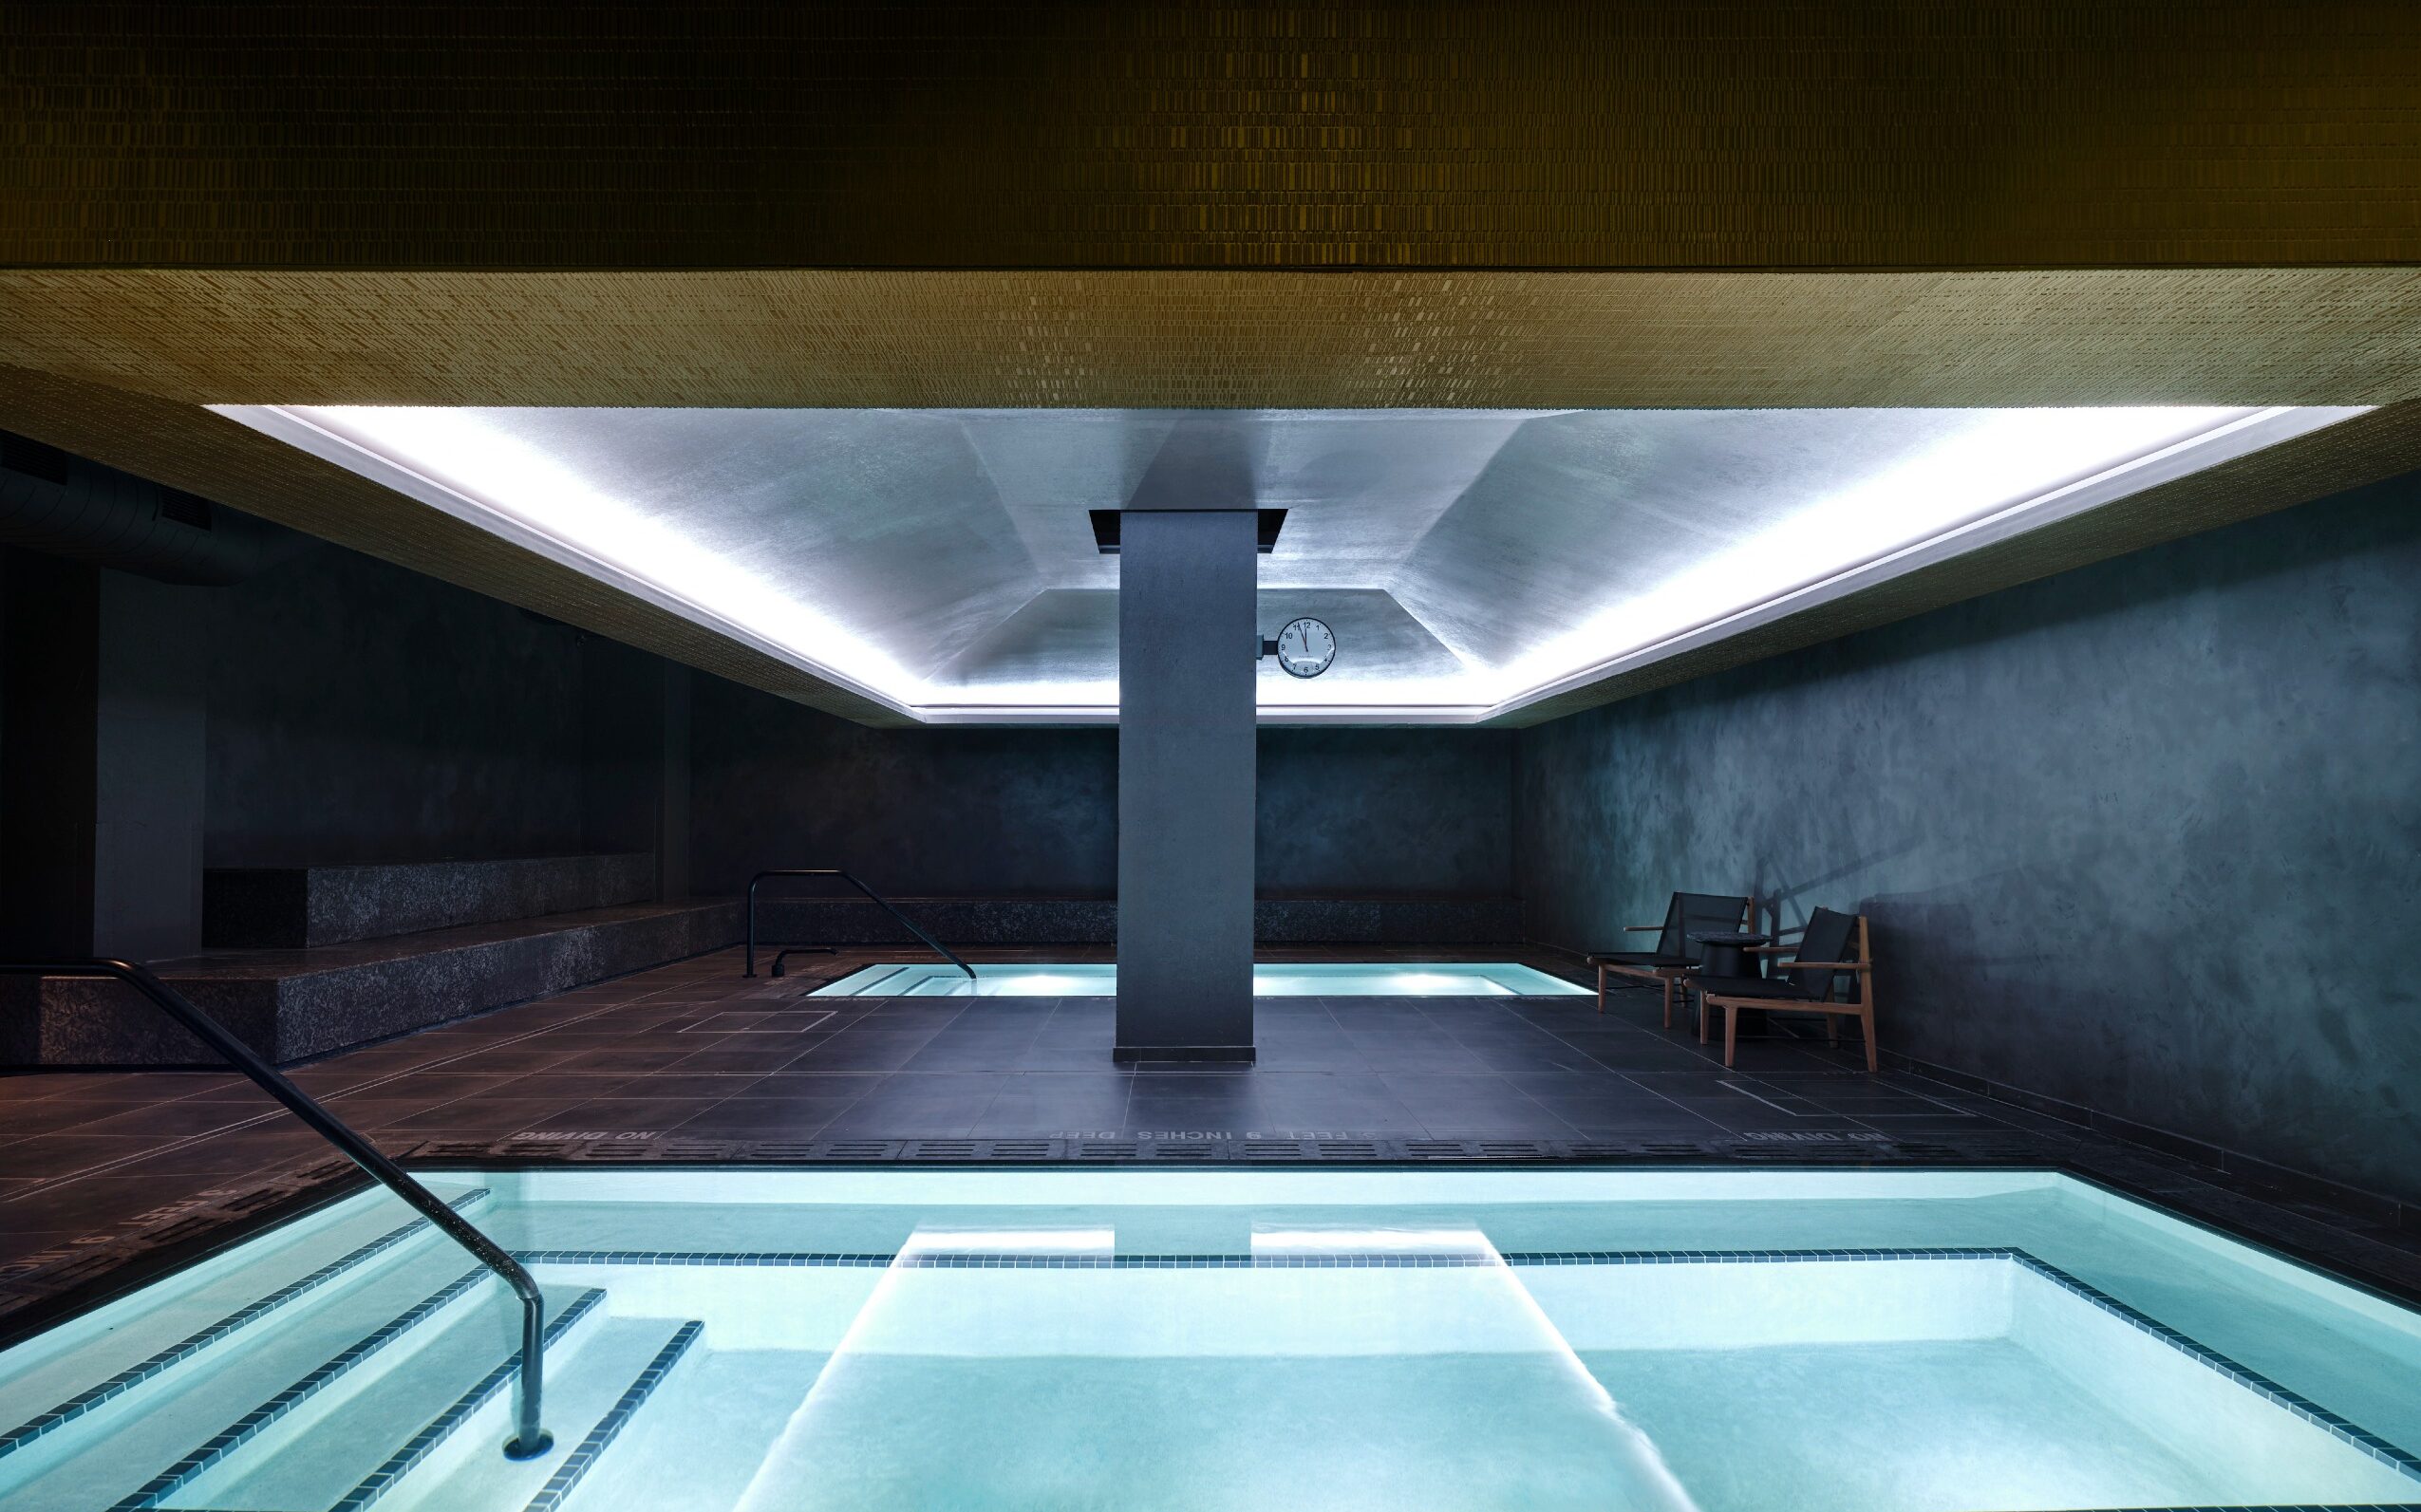 This New York City Spa Draws Inspiration From The Hero's Journey